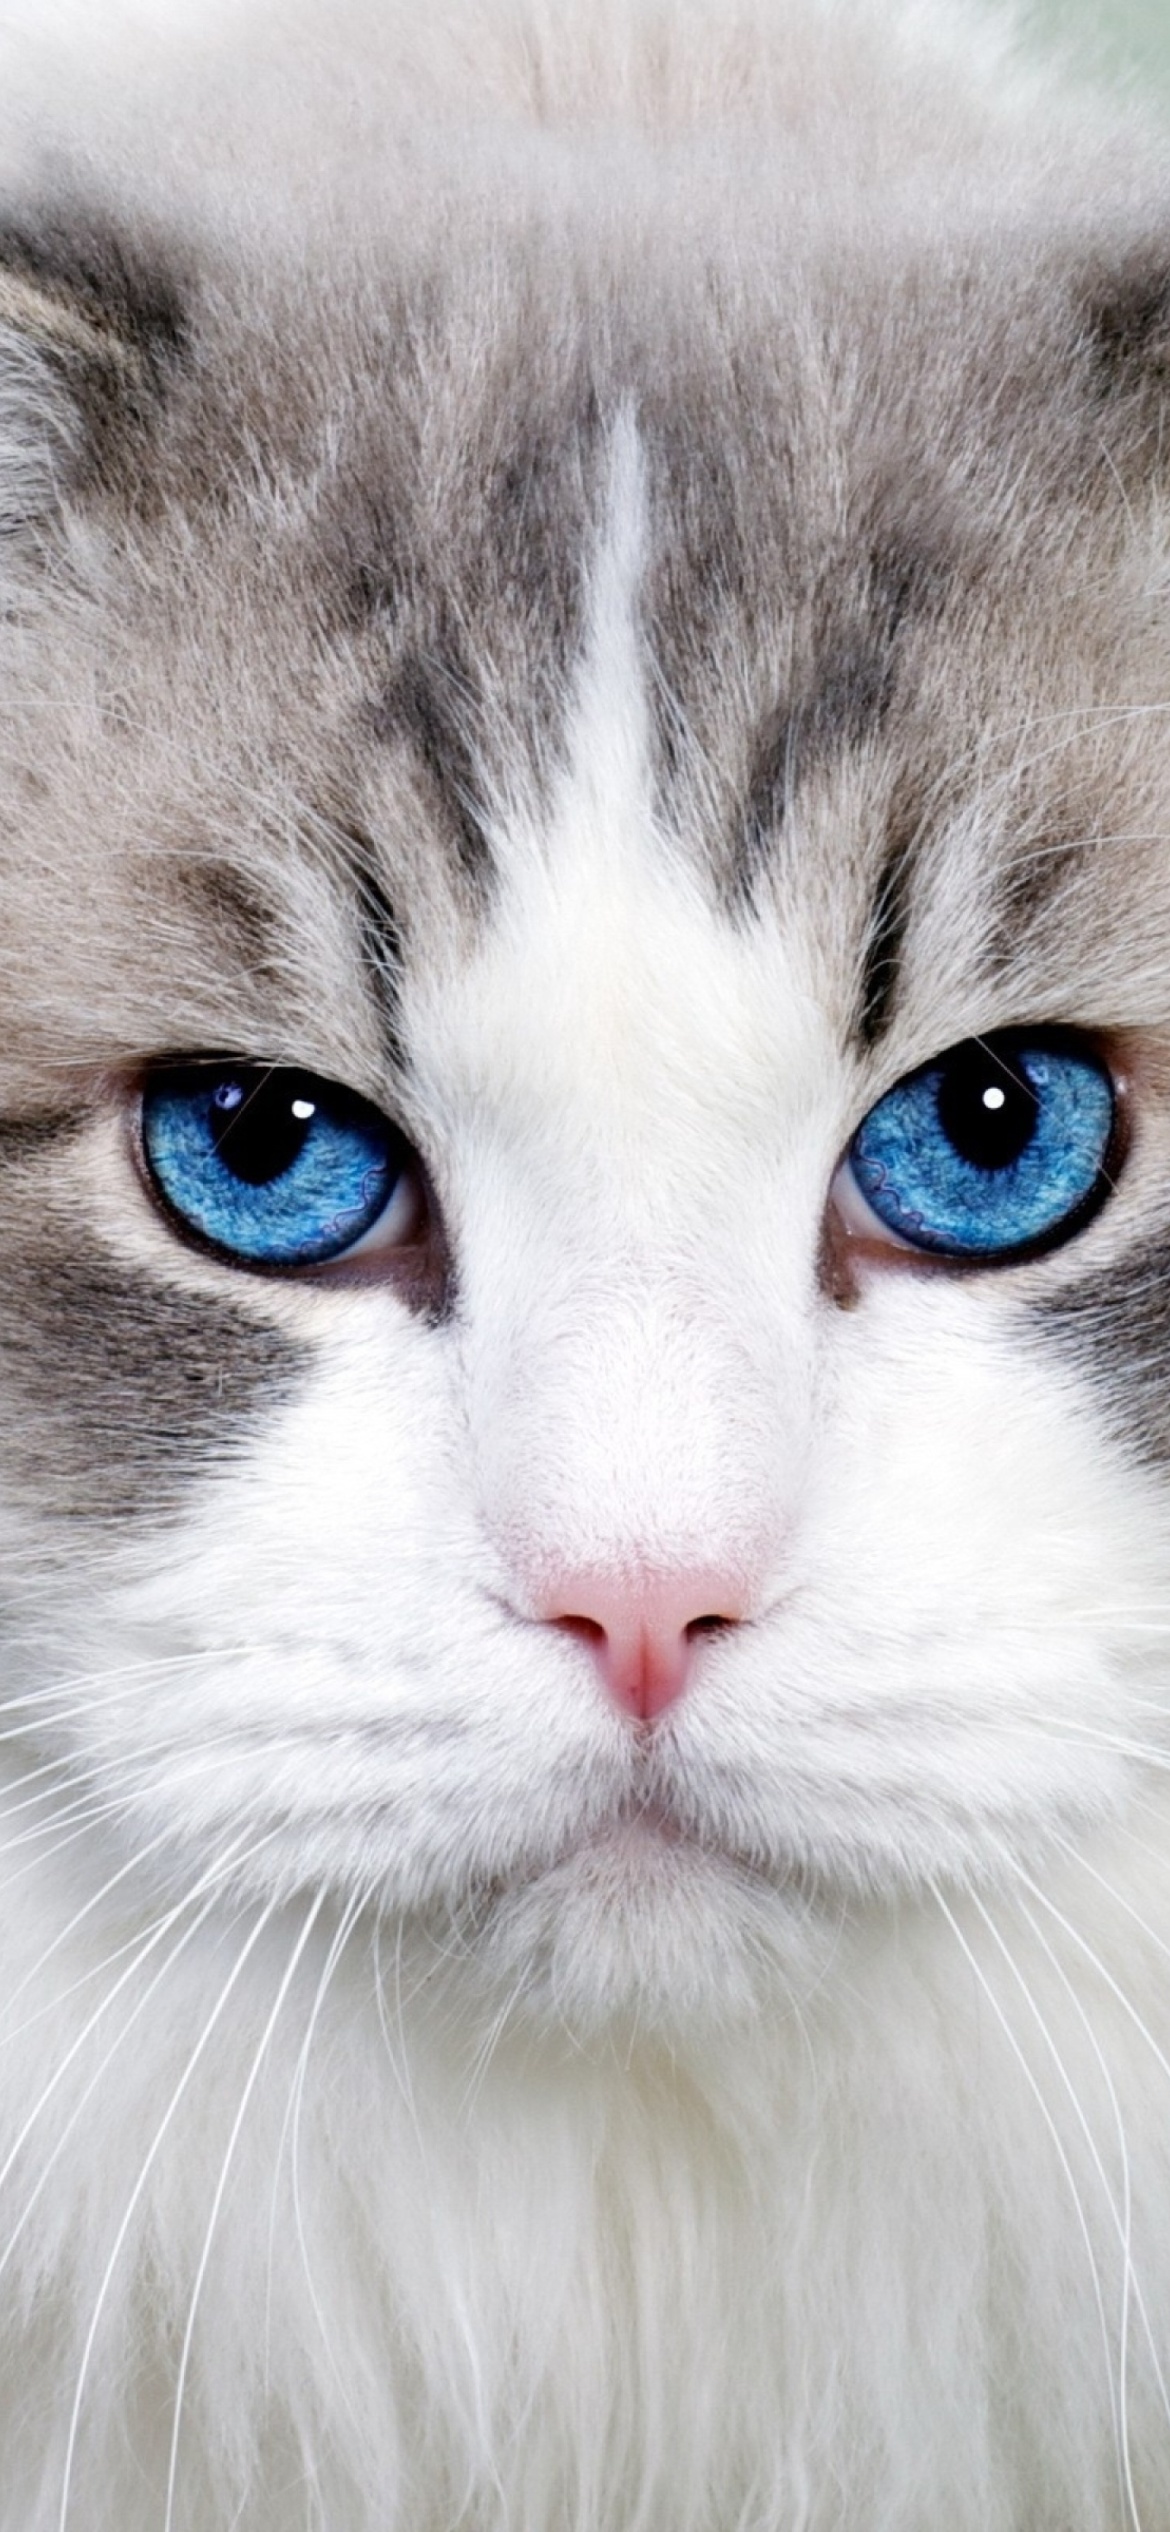 Cat with Blue Eyes wallpaper 1170x2532